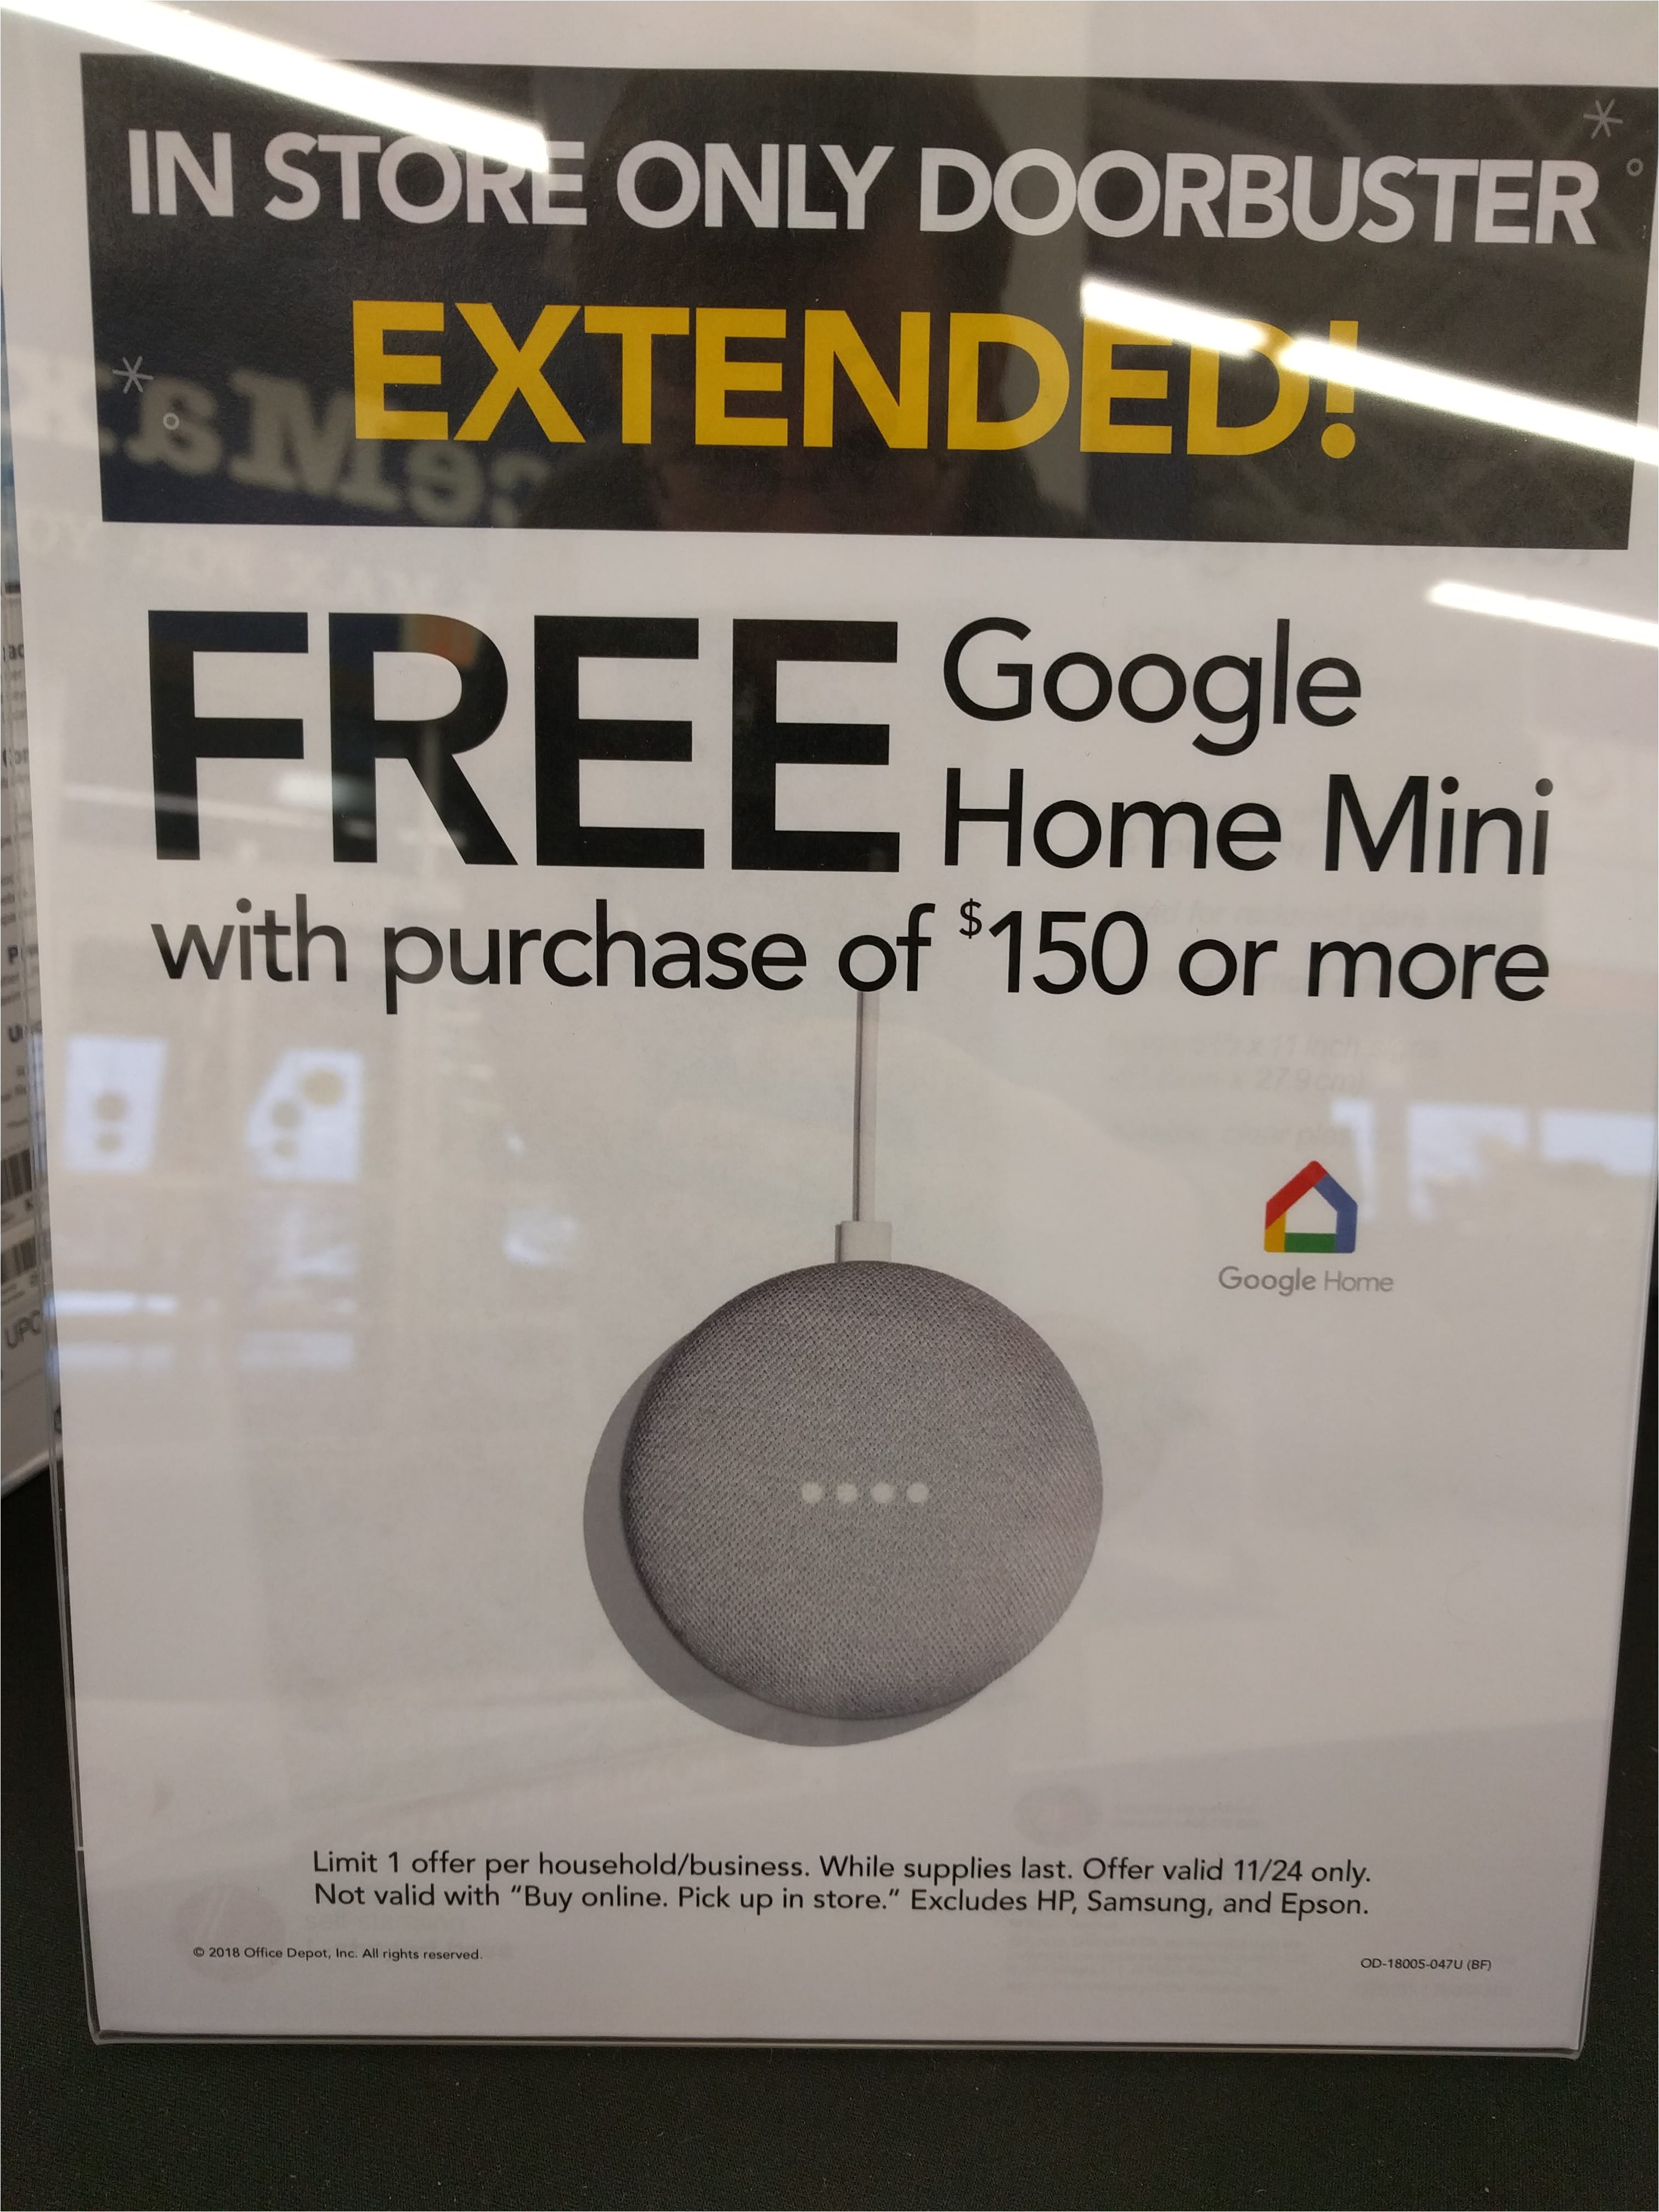 update office depot max is offering a free google home mini if you spend 150 or more i m sure it s supposed to exclude gift cards but some readers have